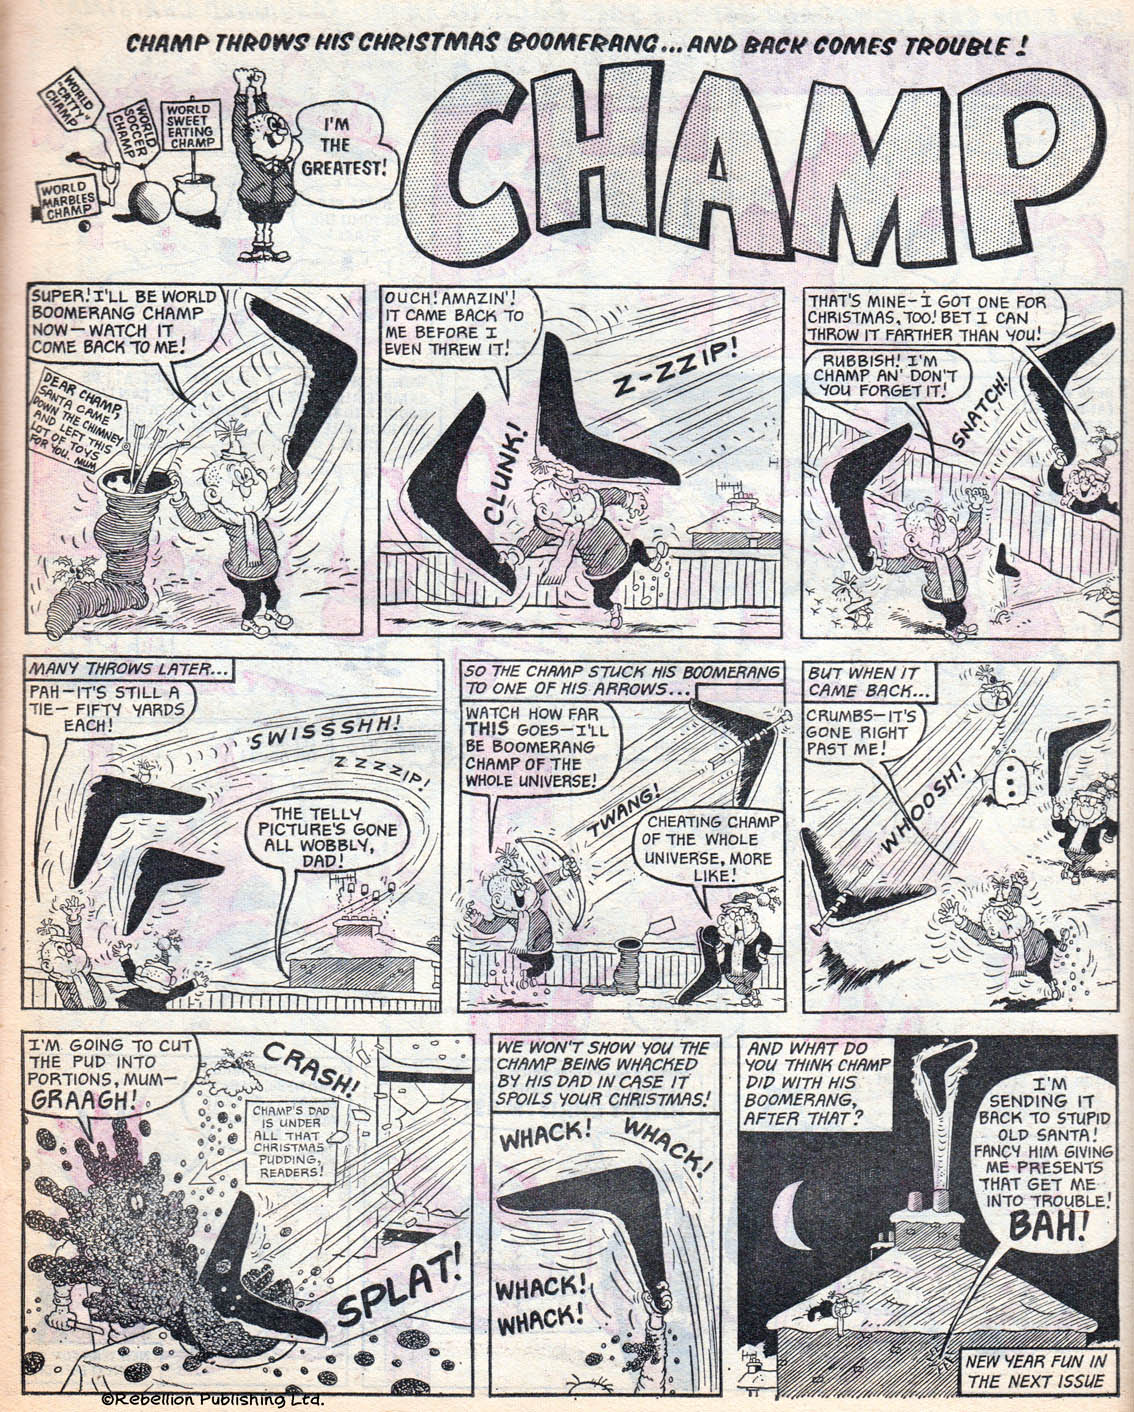 At this stage Leo Baxendale was still drawing Champ although not for long as I recall This was full of his trademark humour and would have been a good